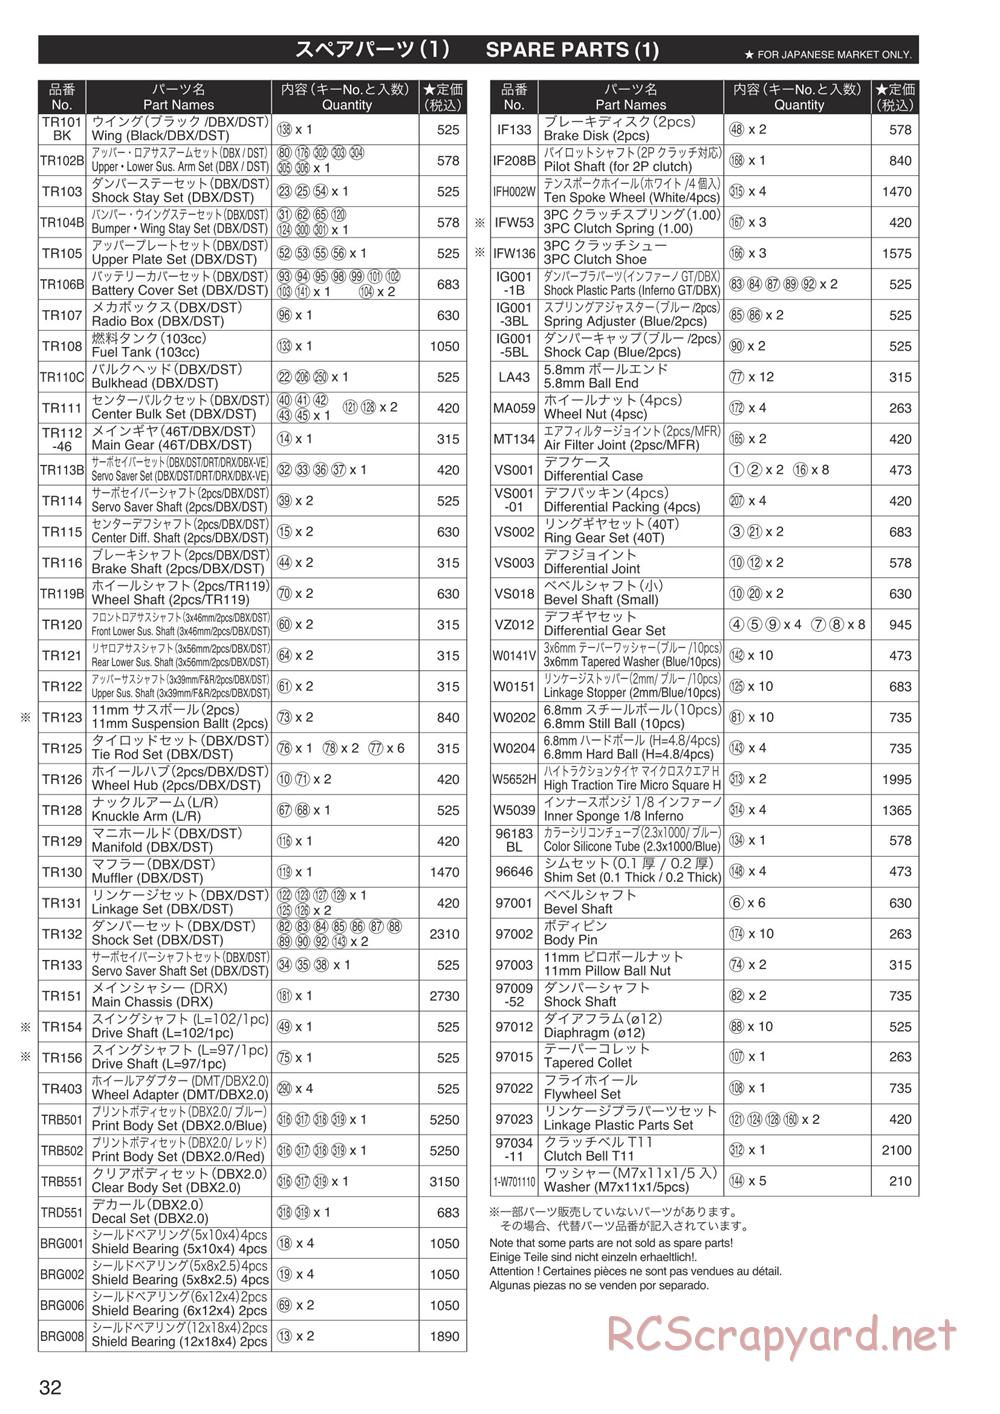 Kyosho - DBX 2.0 - Parts List - Page 1